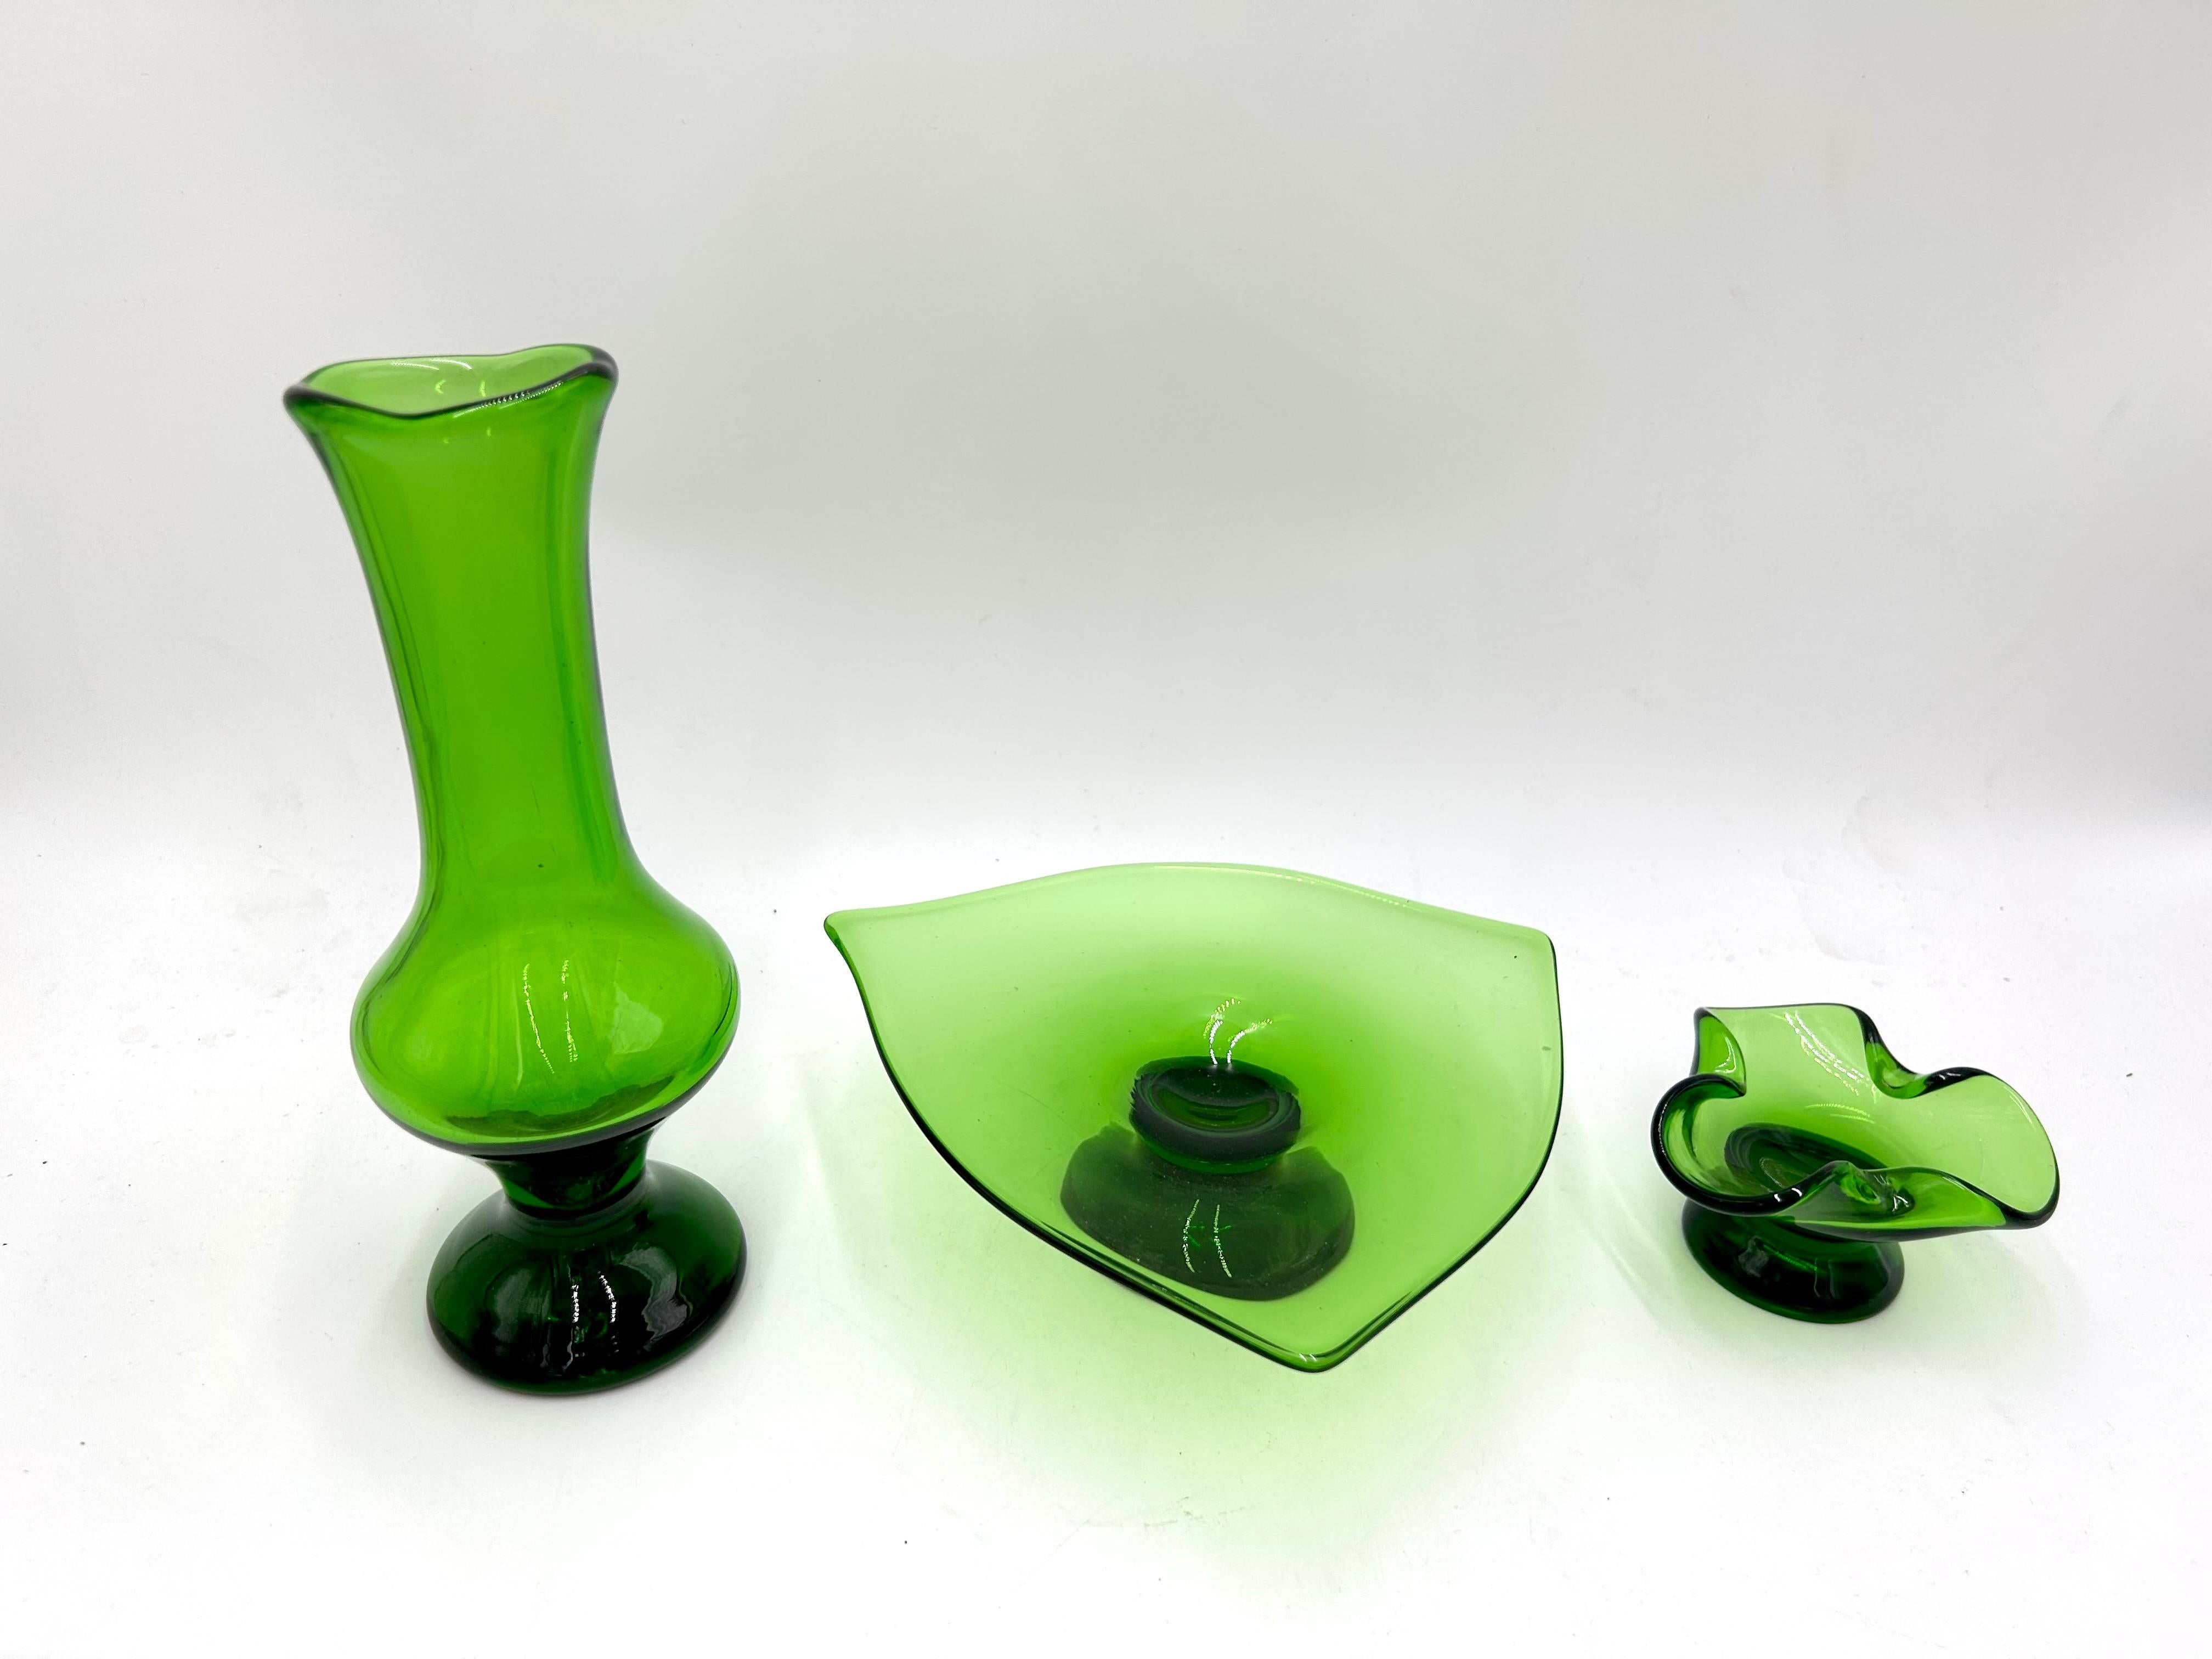 A green set of three glasses - a vase, a plate and an ashtray

Very good condition, no damage

Vase: height: 23cm, diameter: 7cm

Plate: height 6cm, width 20cm

Ashtray: height 5.5 cm, width 10 cm.